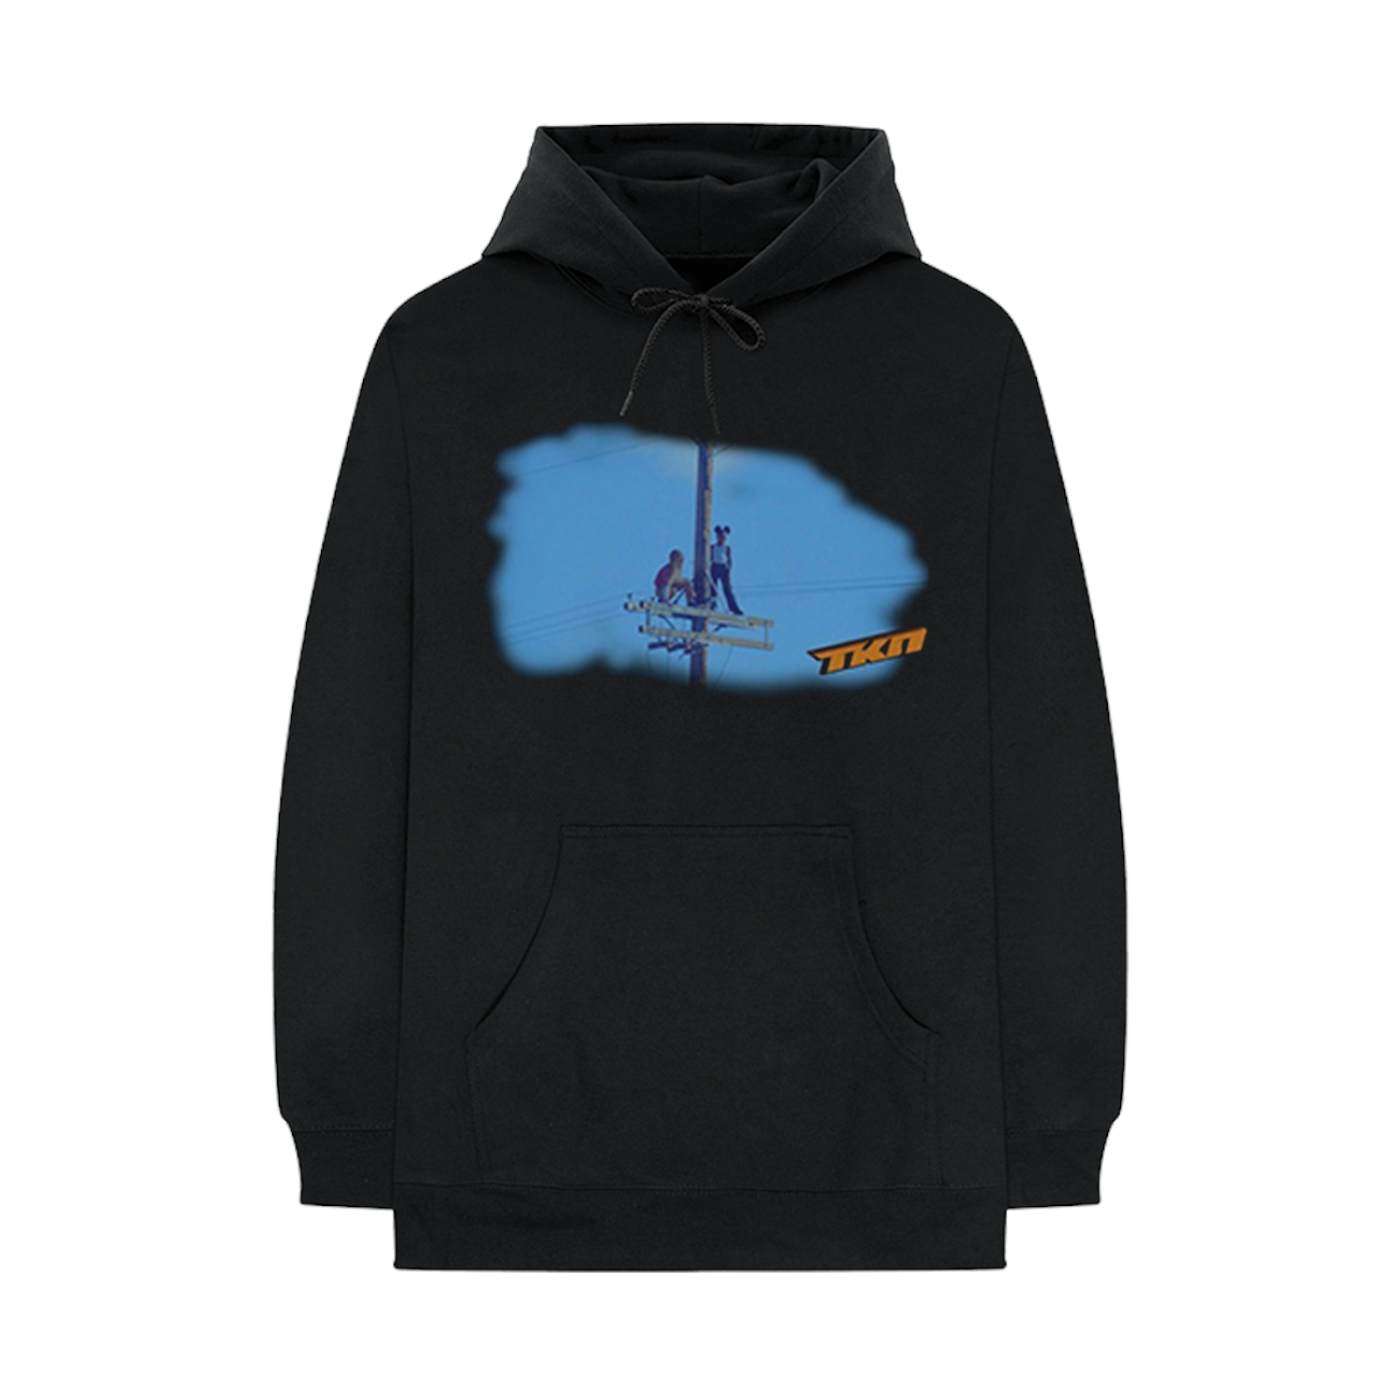 ROSALÍA Limited Edition “TKN” Collection Hoodie